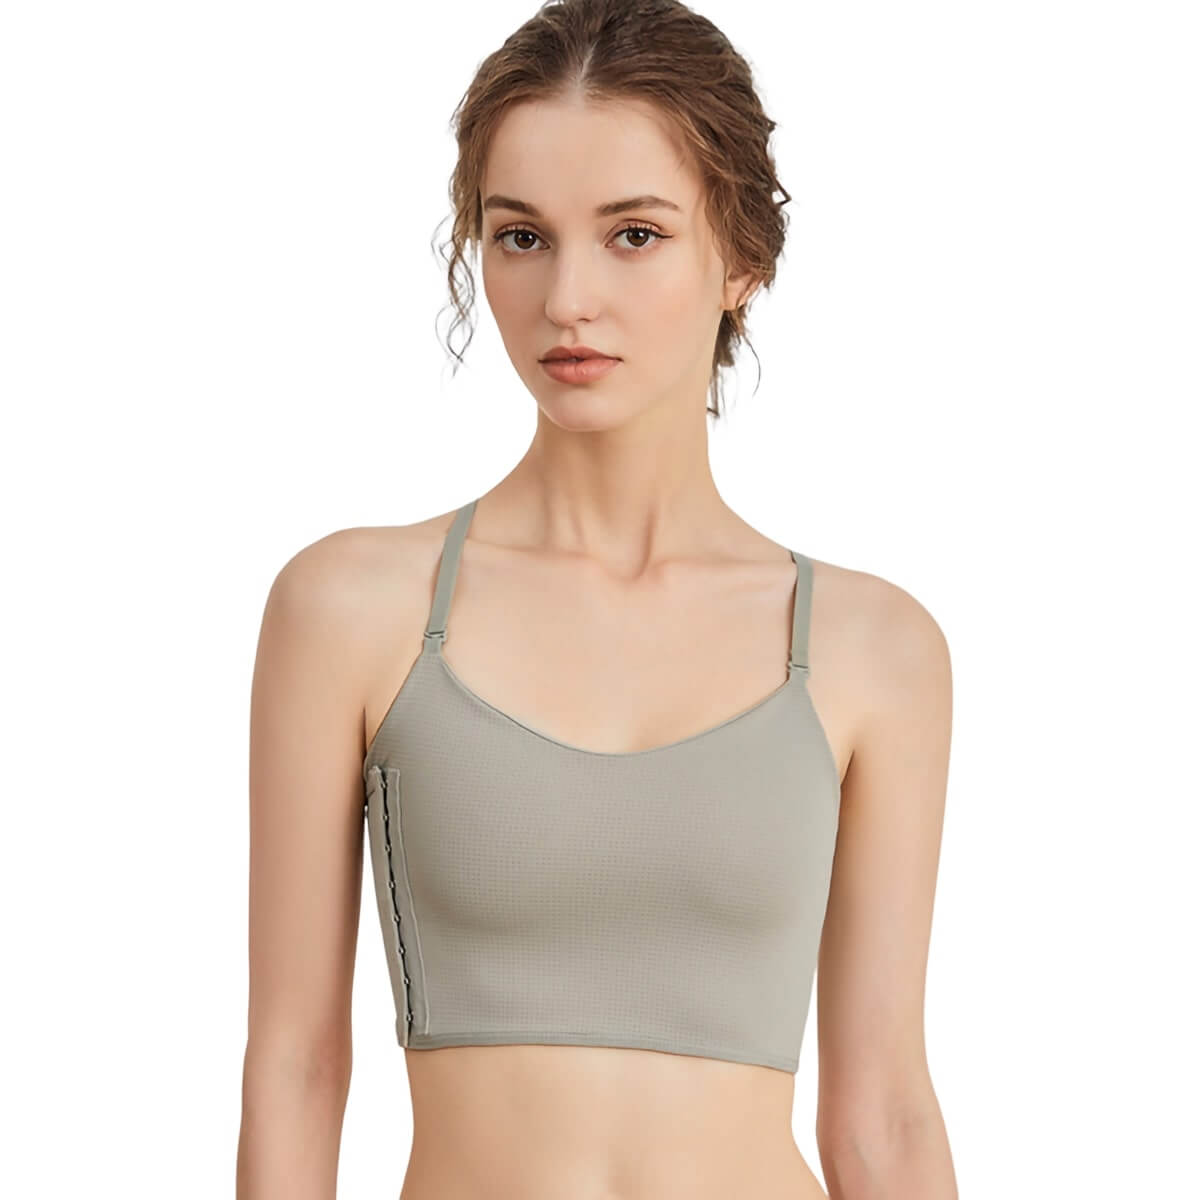 Naked Feeling Compression Bra for Binding